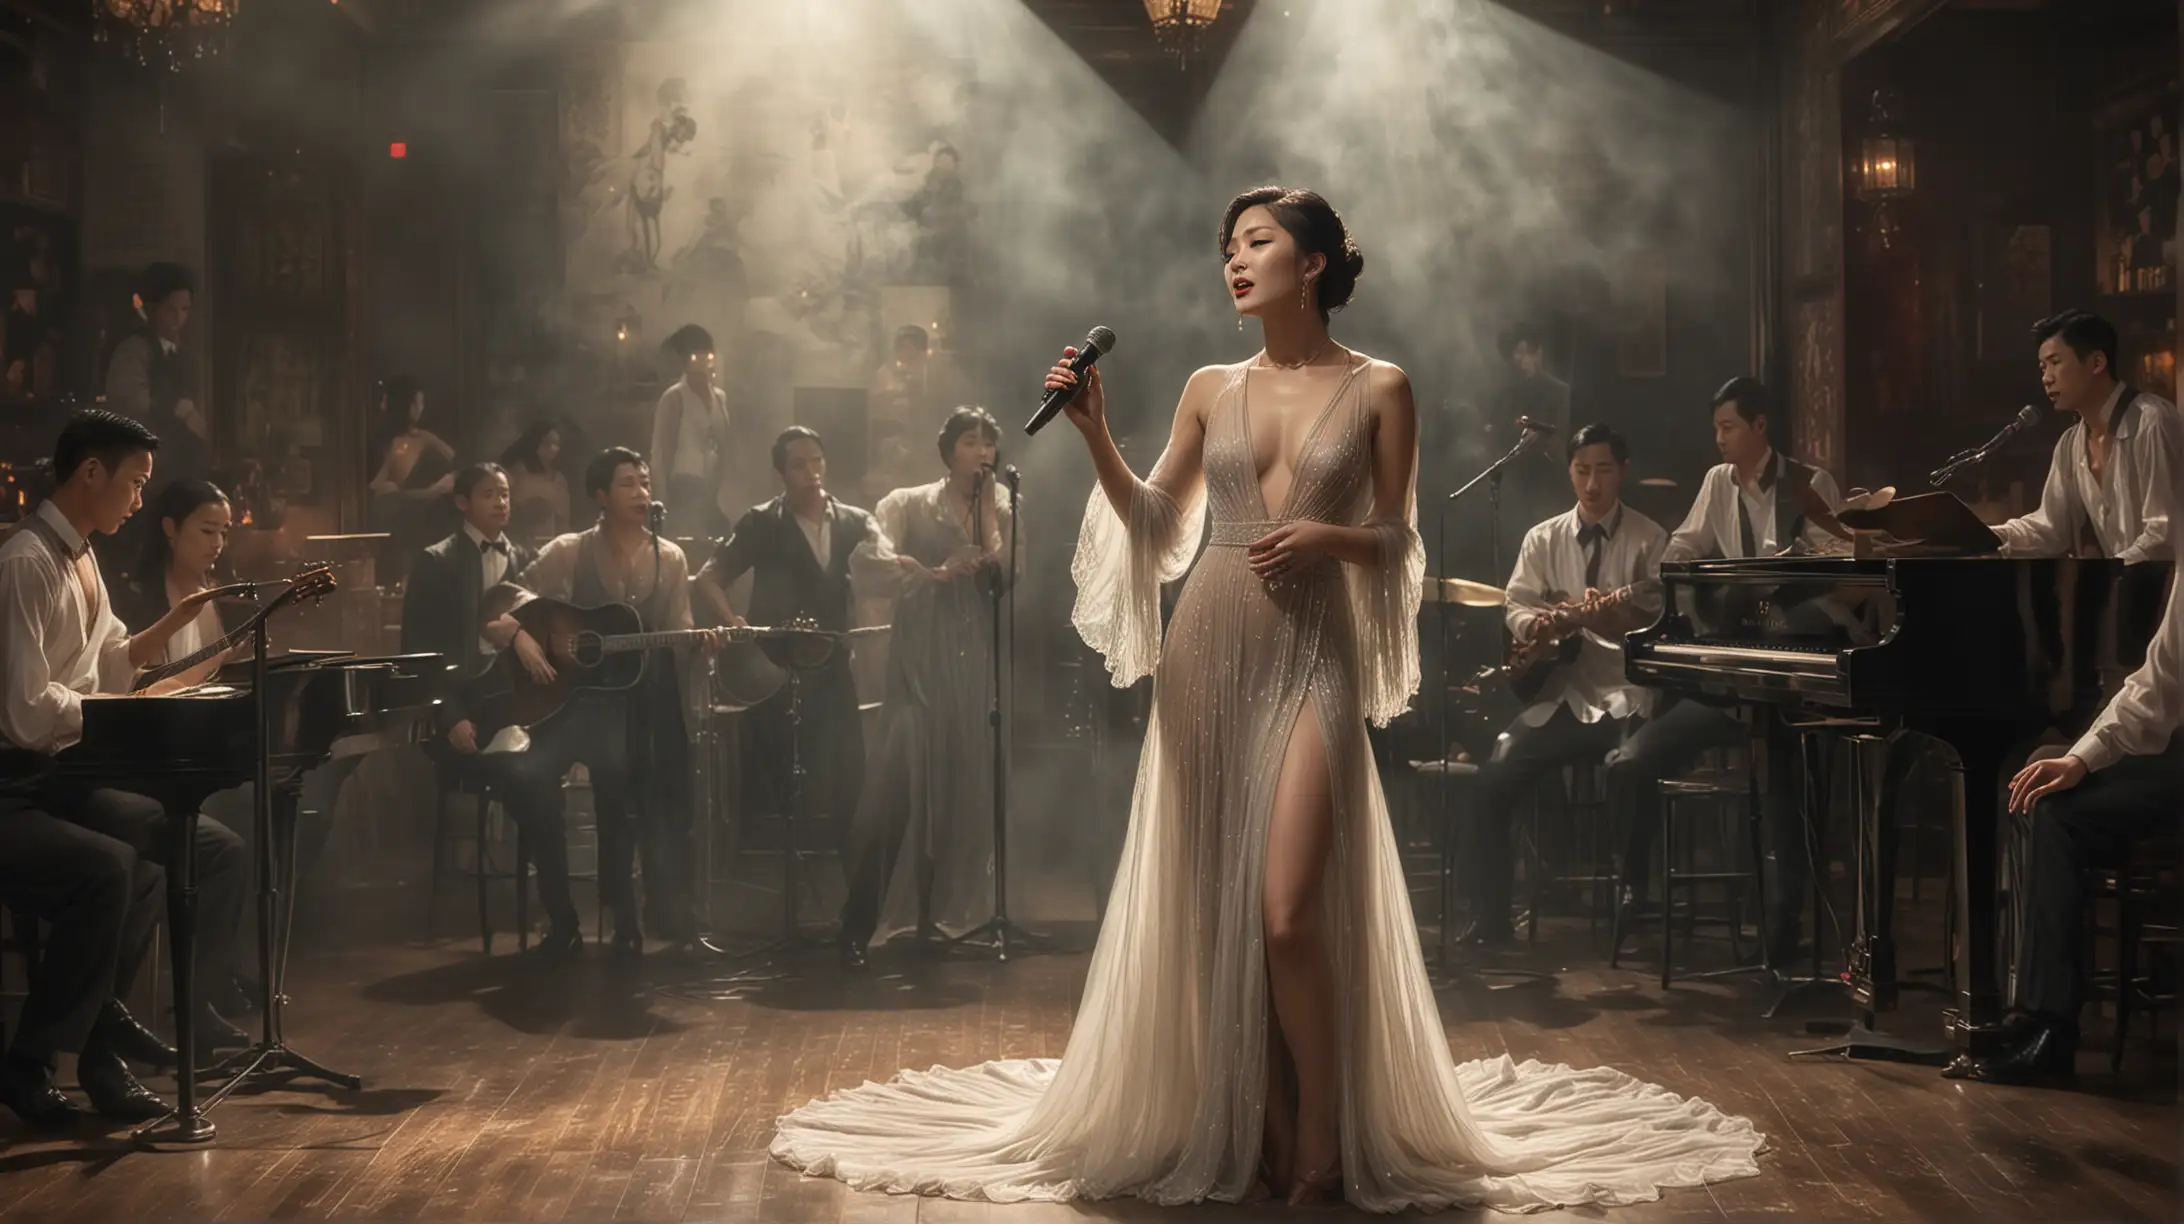 Chinese singer in a low-cut sheer gown, singing in a small prohibition era nightclub, smoky sensual atmosphere, dimly lit except for the figure of the singer, narrative style painting